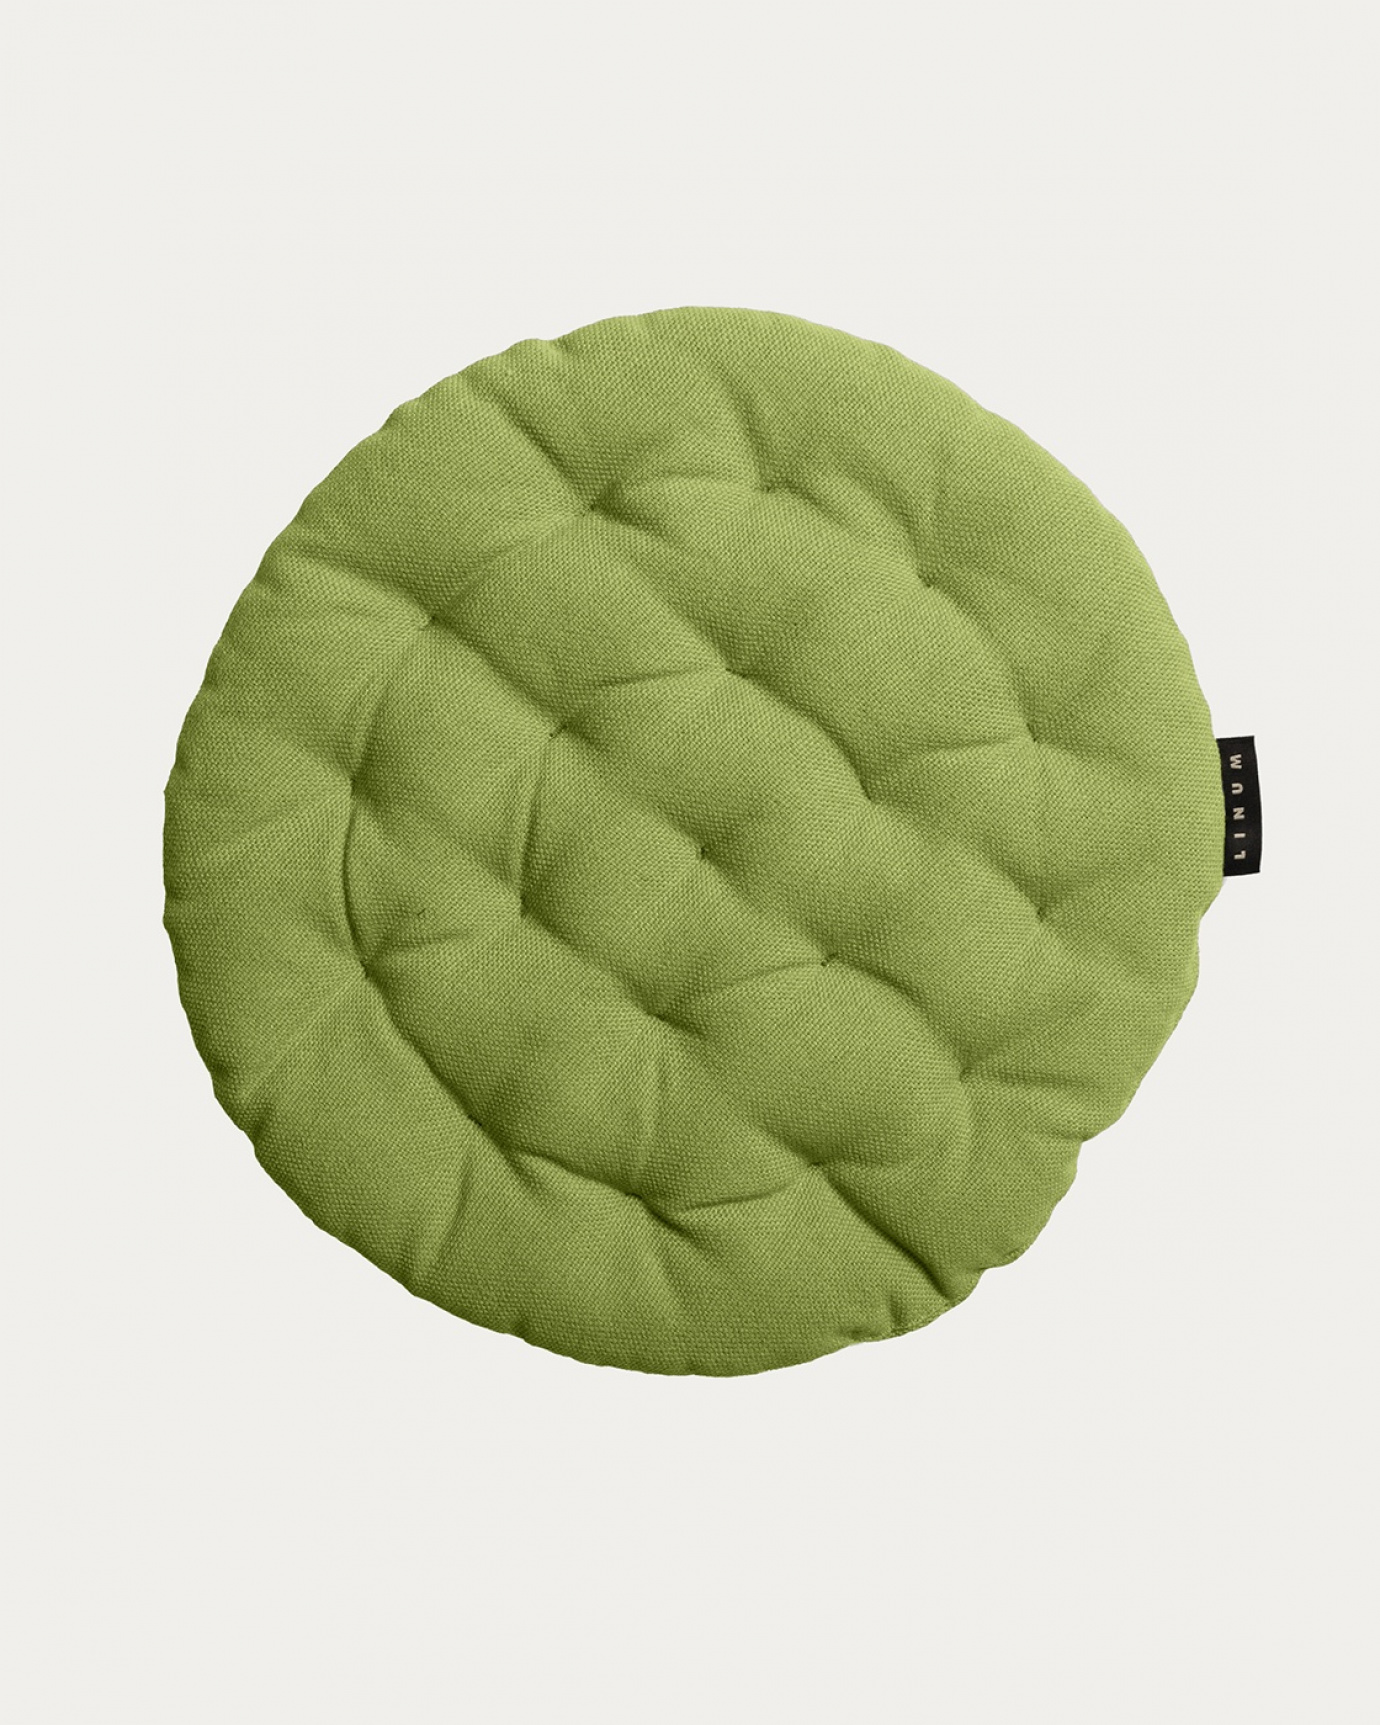 Product image moss green PEPPER seat cushion made of soft cotton with recycled polyester filling from LINUM DESIGN. Size ø37 cm.